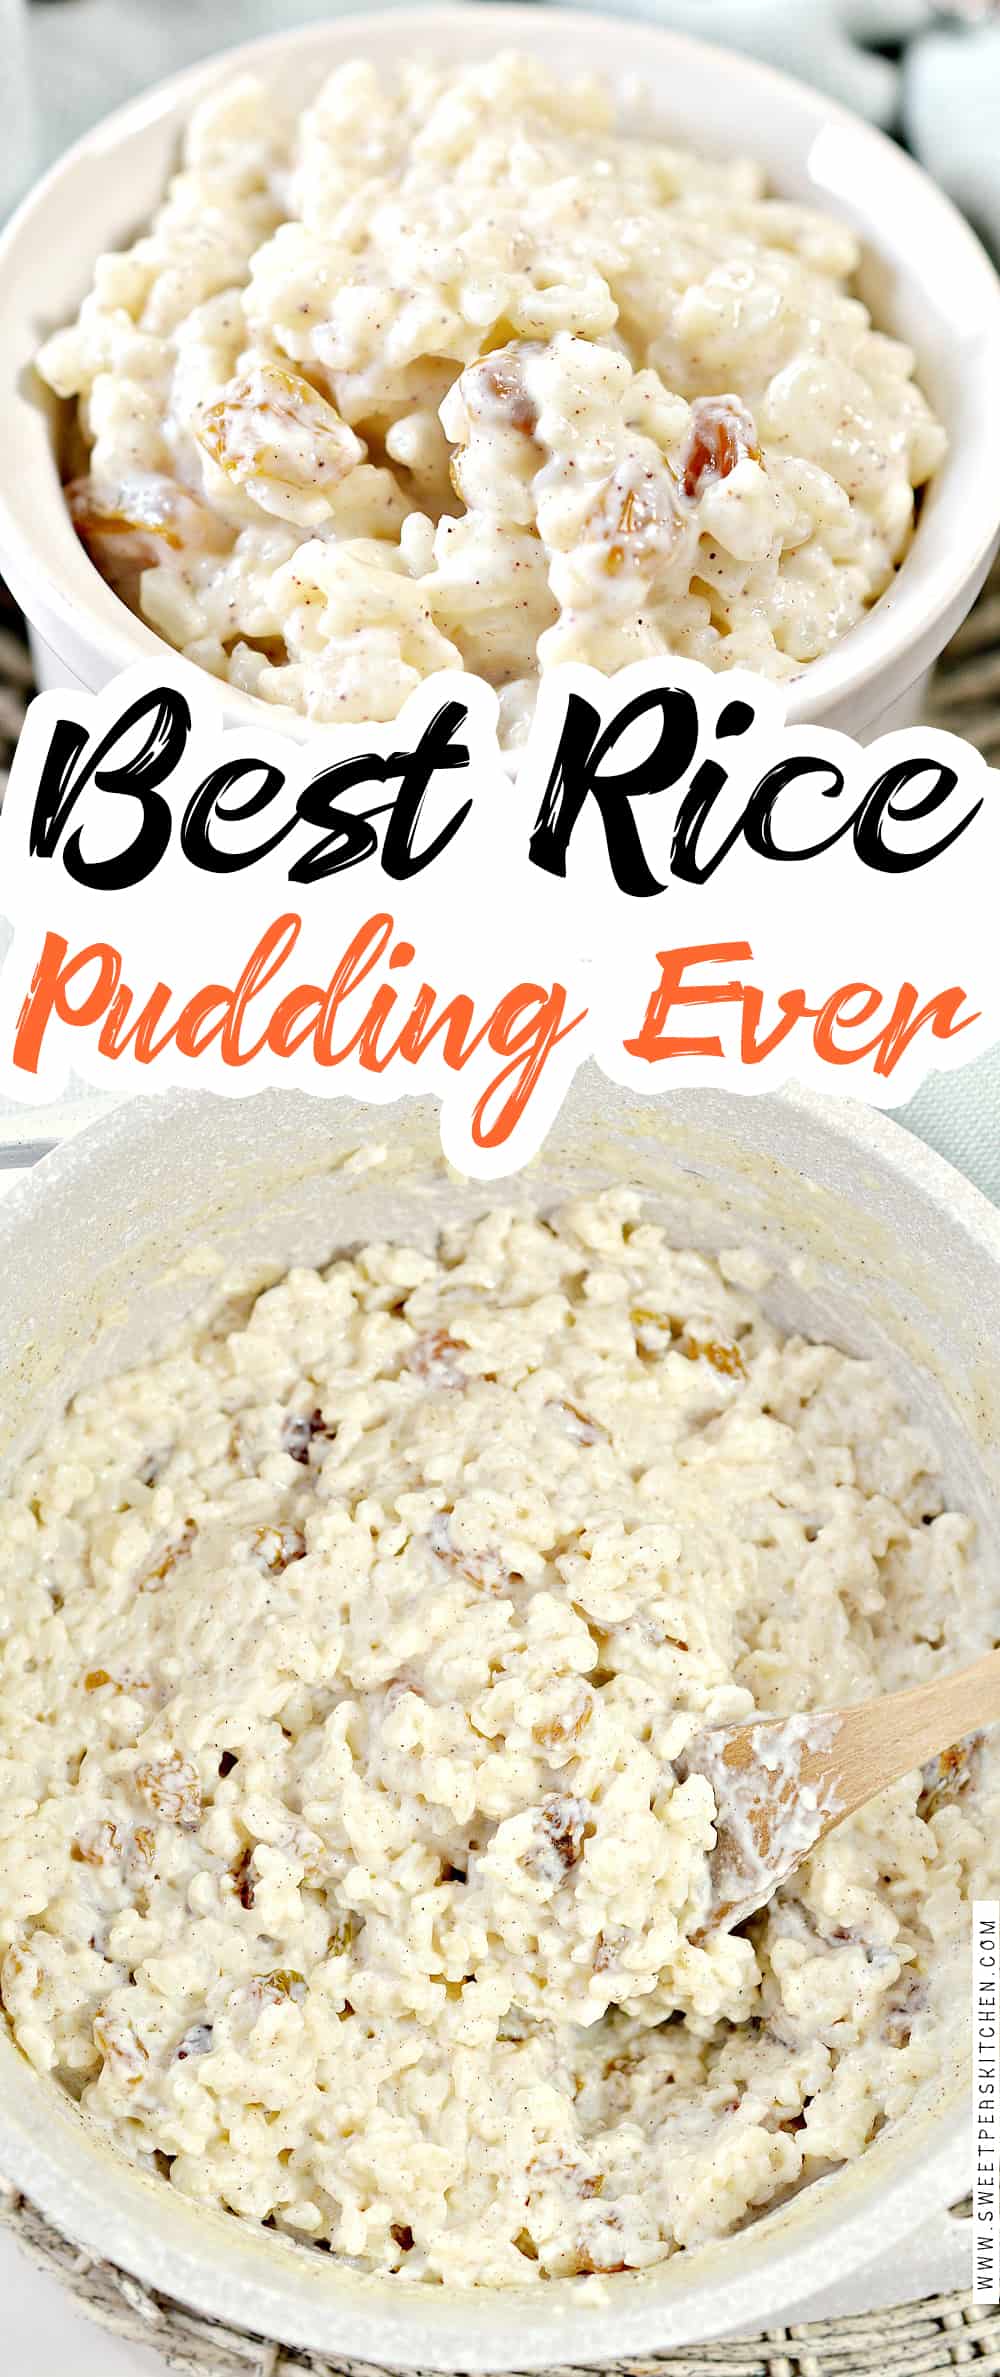 Best Rice Pudding Ever